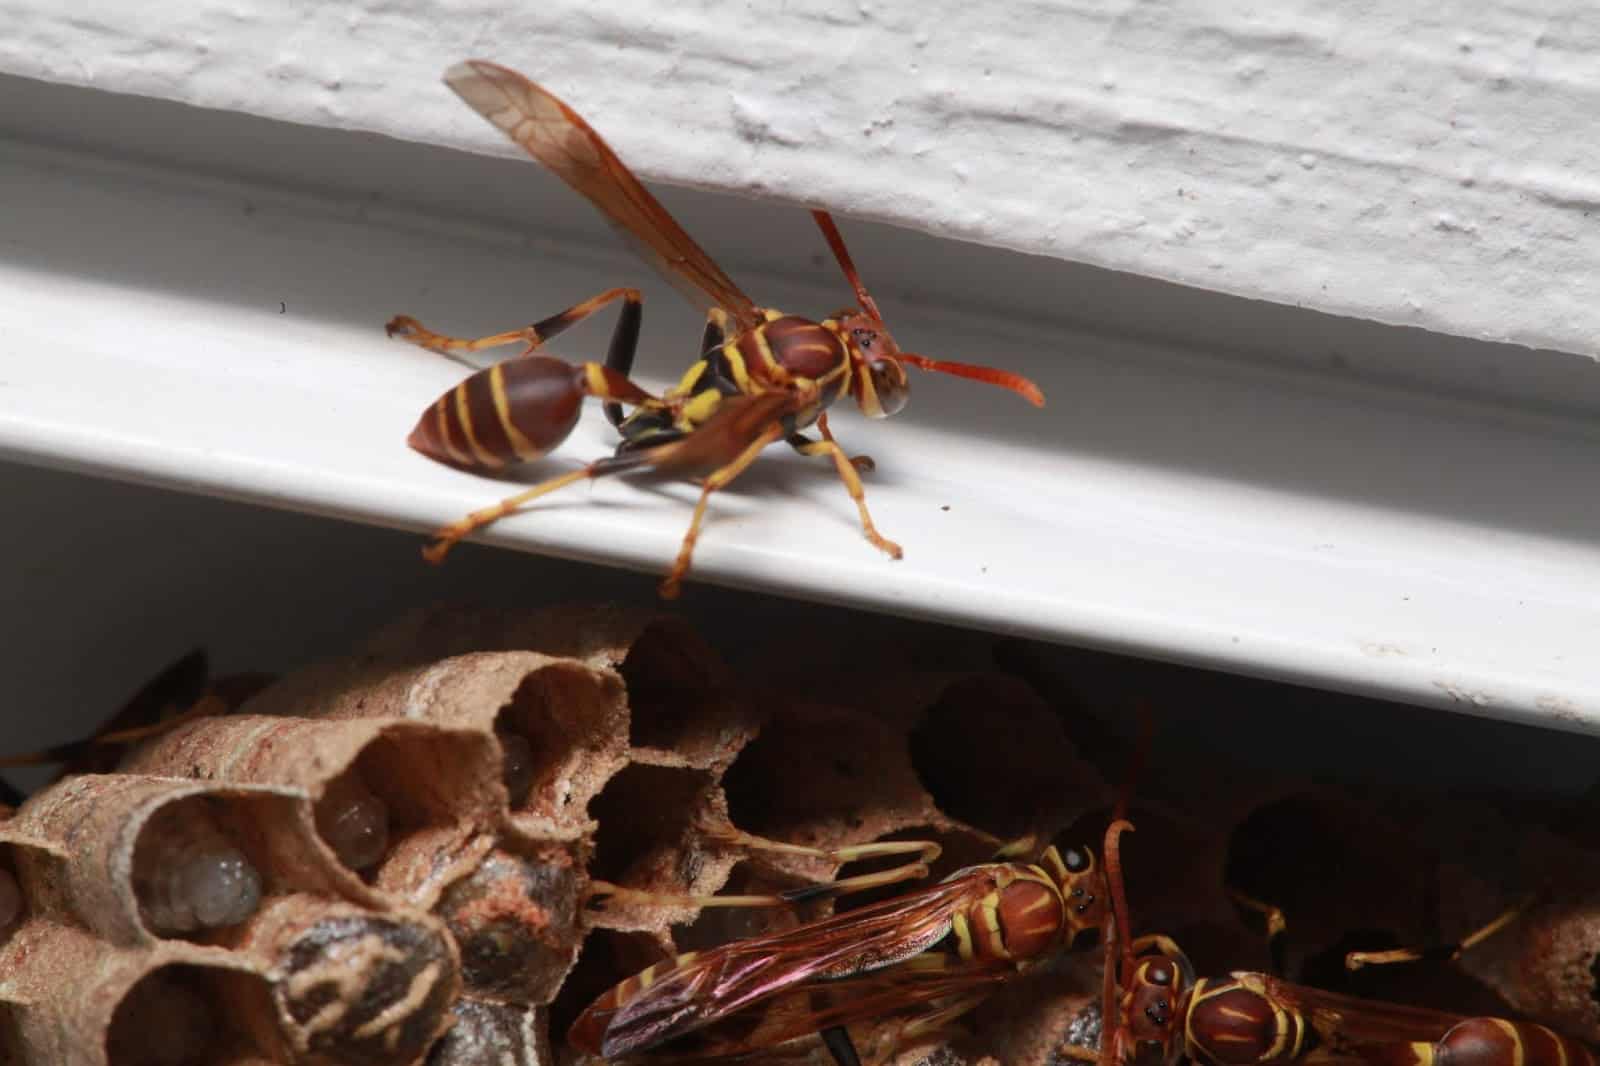 You Have A Queen Wasp